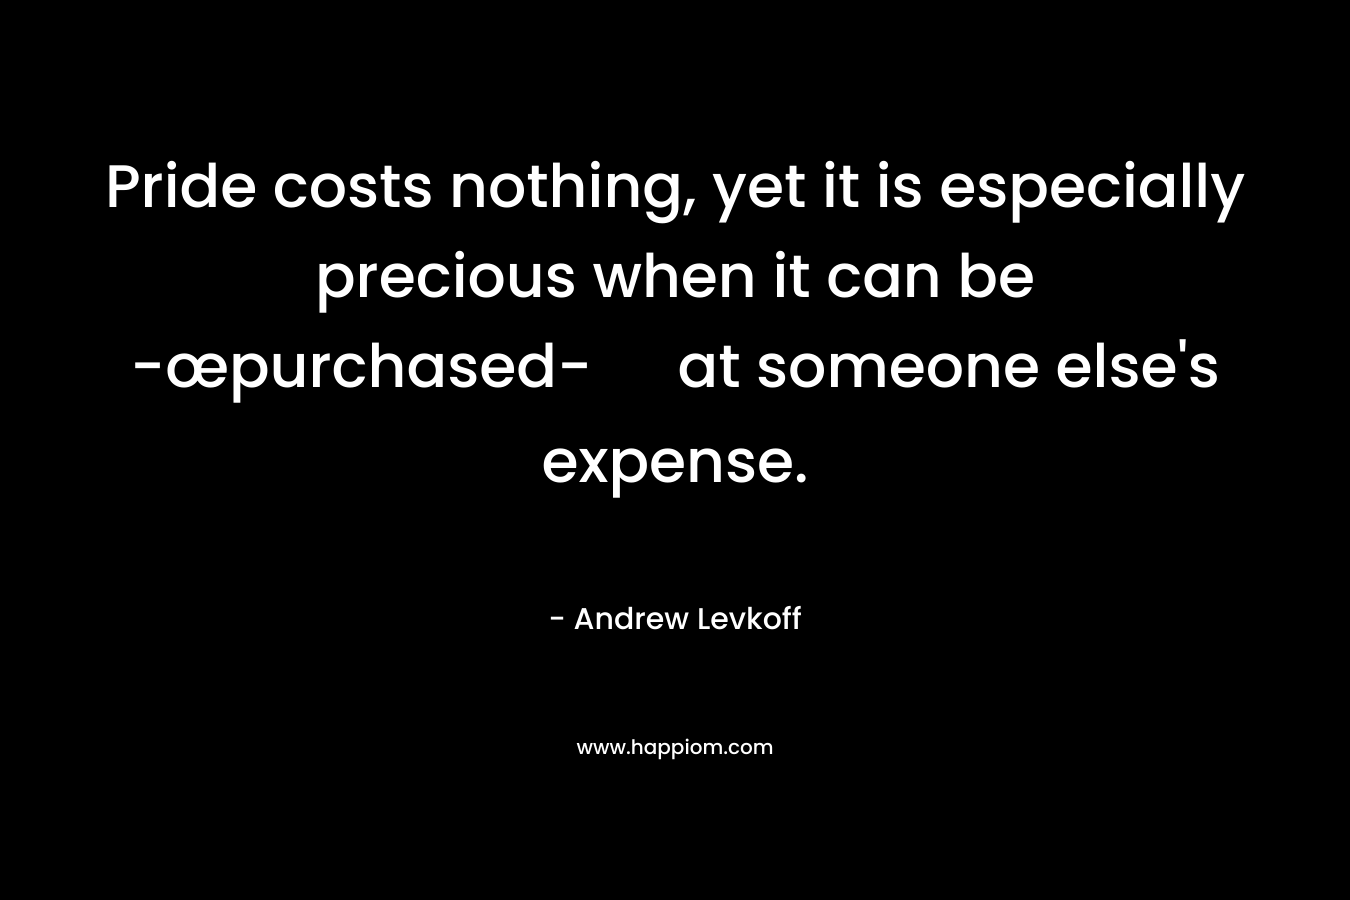 Pride costs nothing, yet it is especially precious when it can be -œpurchased- at someone else’s expense. – Andrew Levkoff